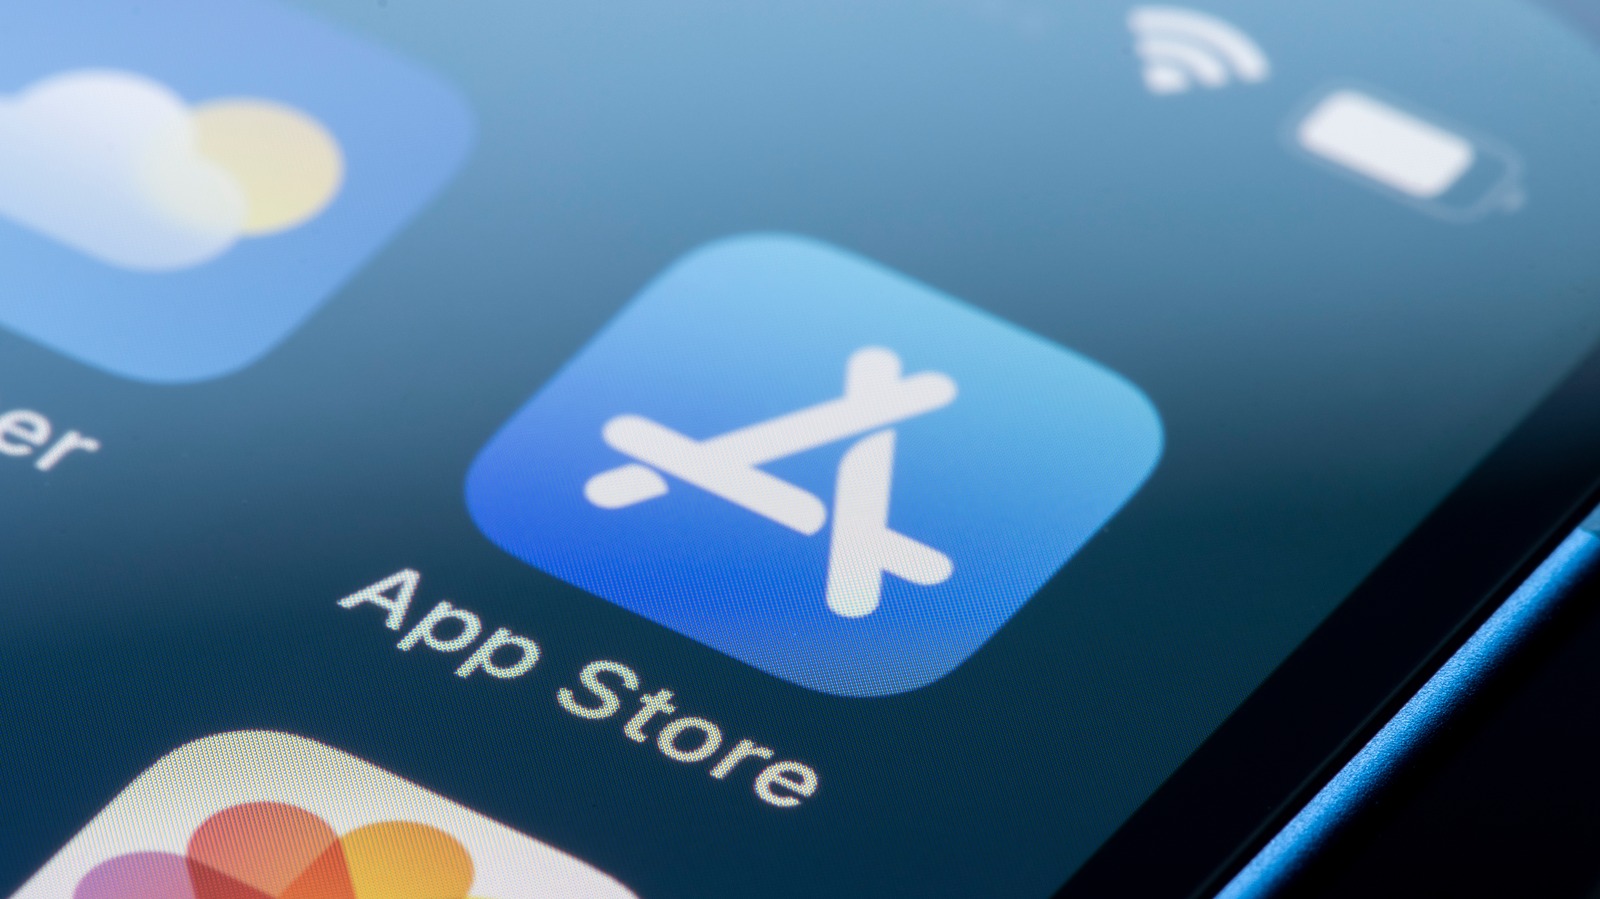 Bombshell Rumor Claims iPhone Will Allow Third-Party Apps And Alternative App Stores – SlashGear